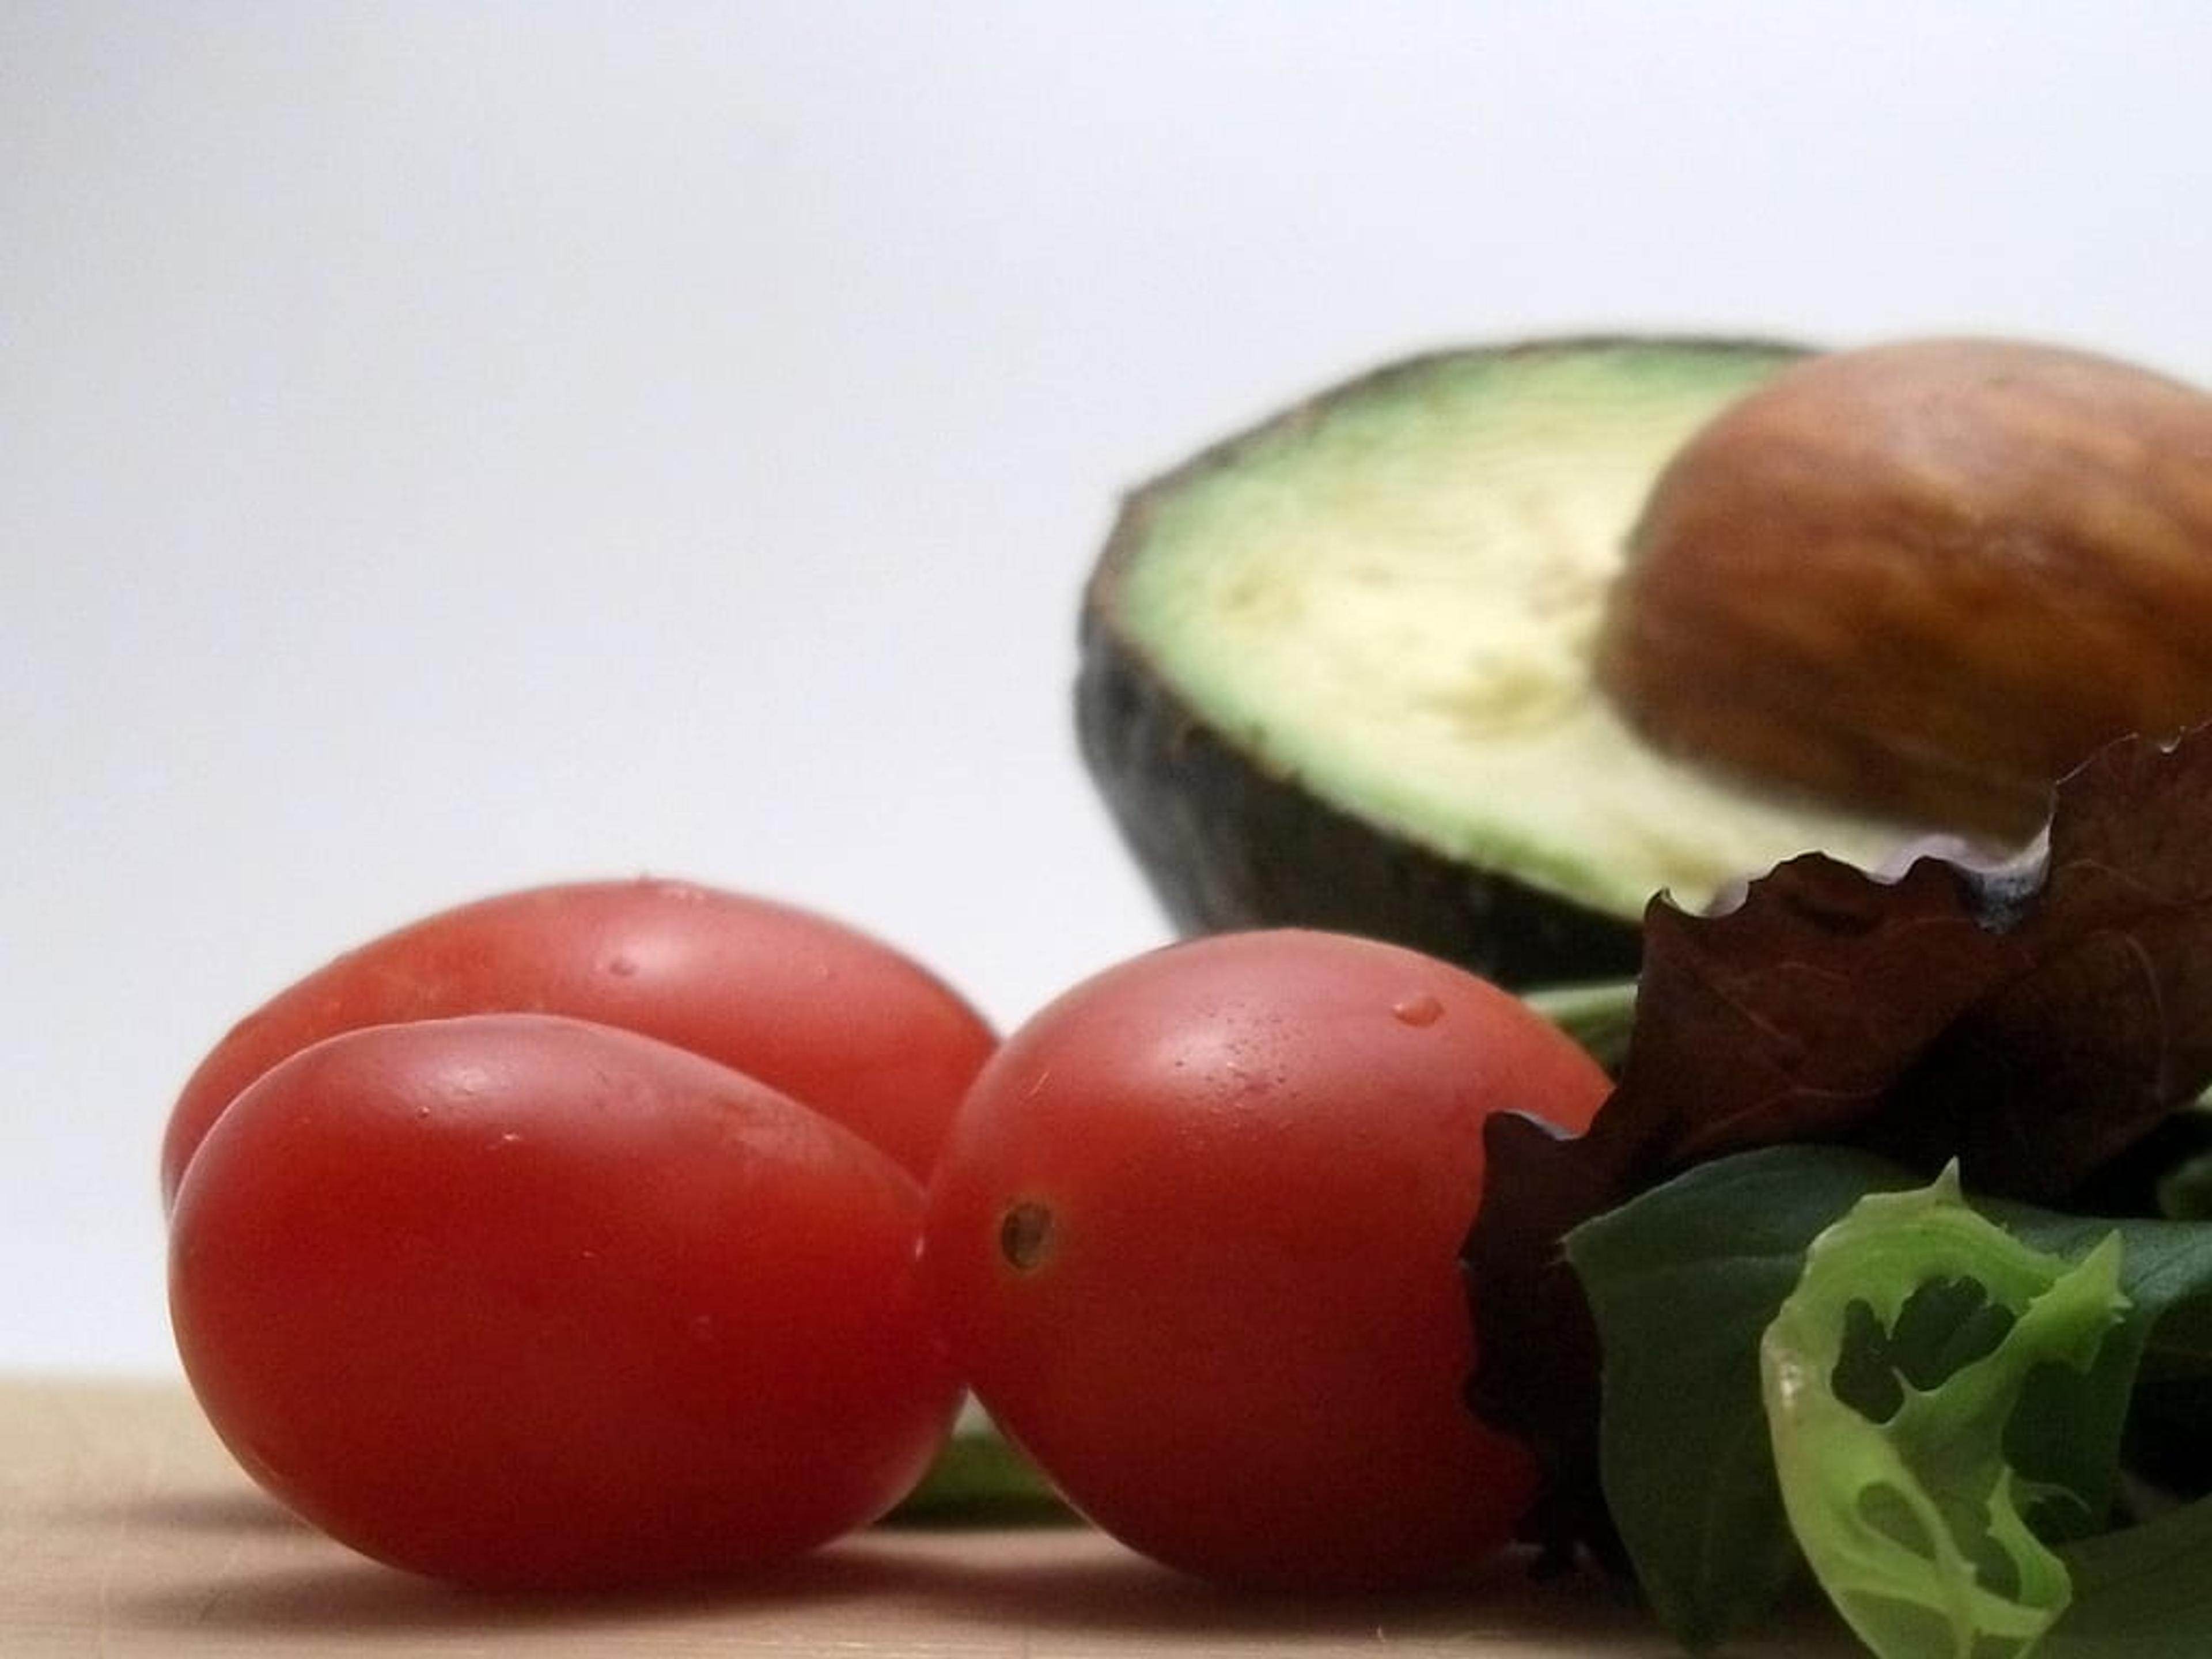 Image of tomatoes and avocado